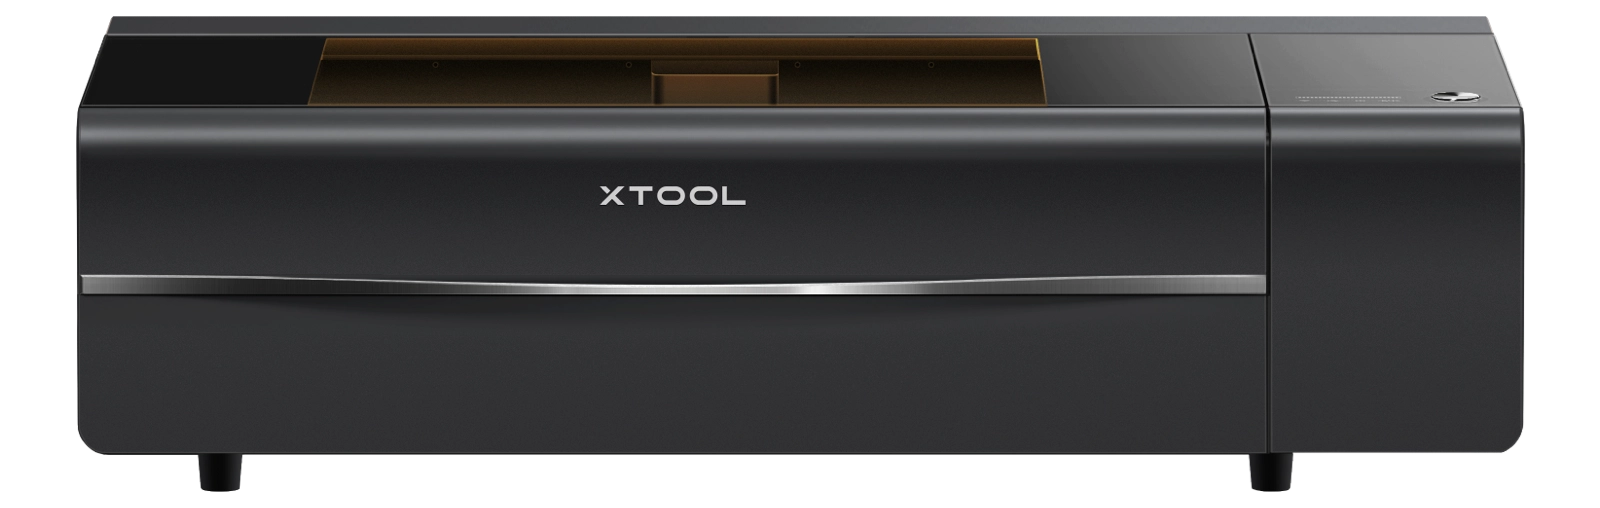 xTool P2 CO2 Laser - Accessories Overview 